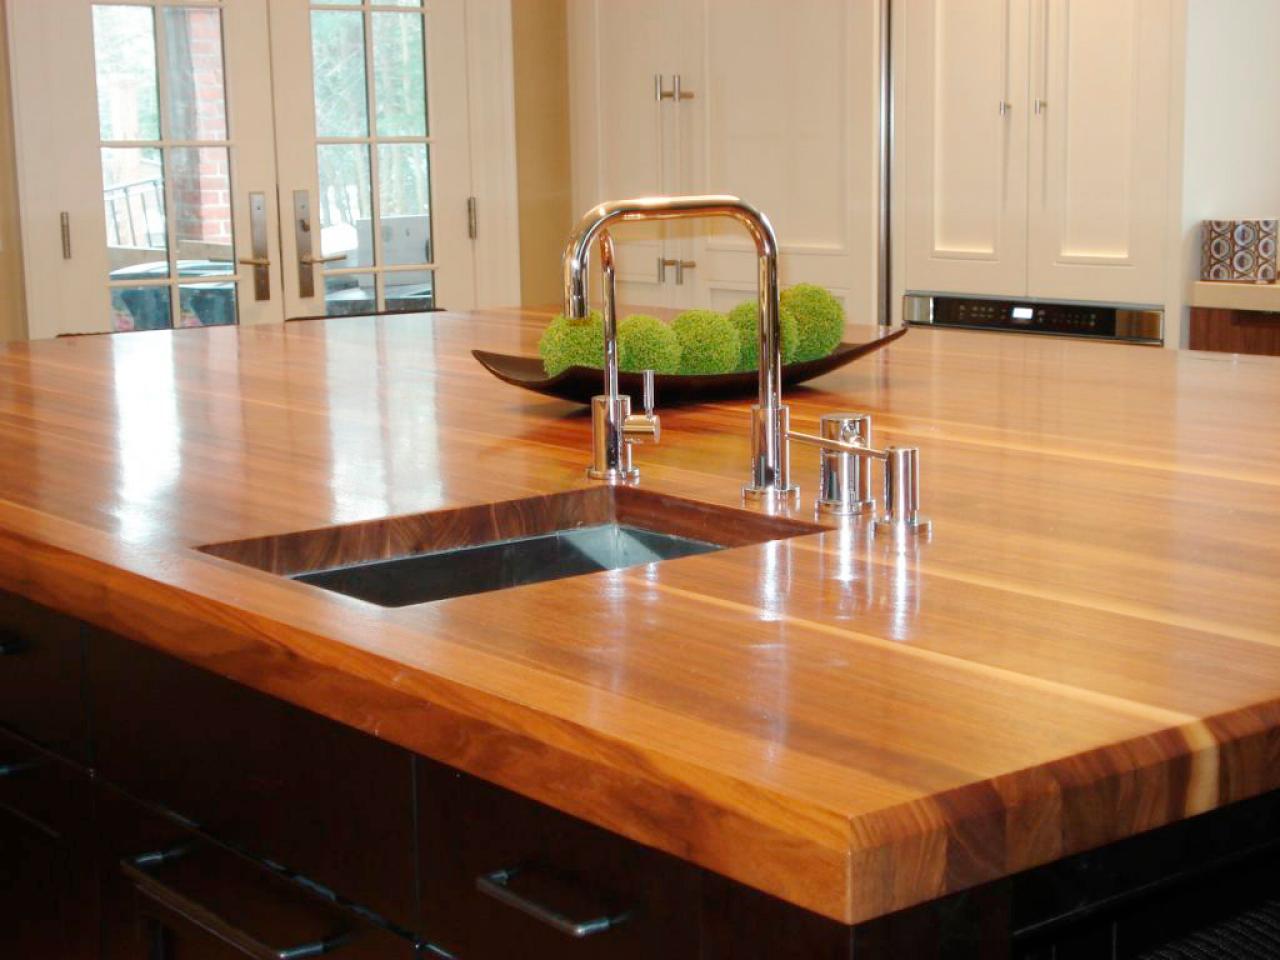 Butcher Block And Wood Countertops, How To Build Countertops With Wood